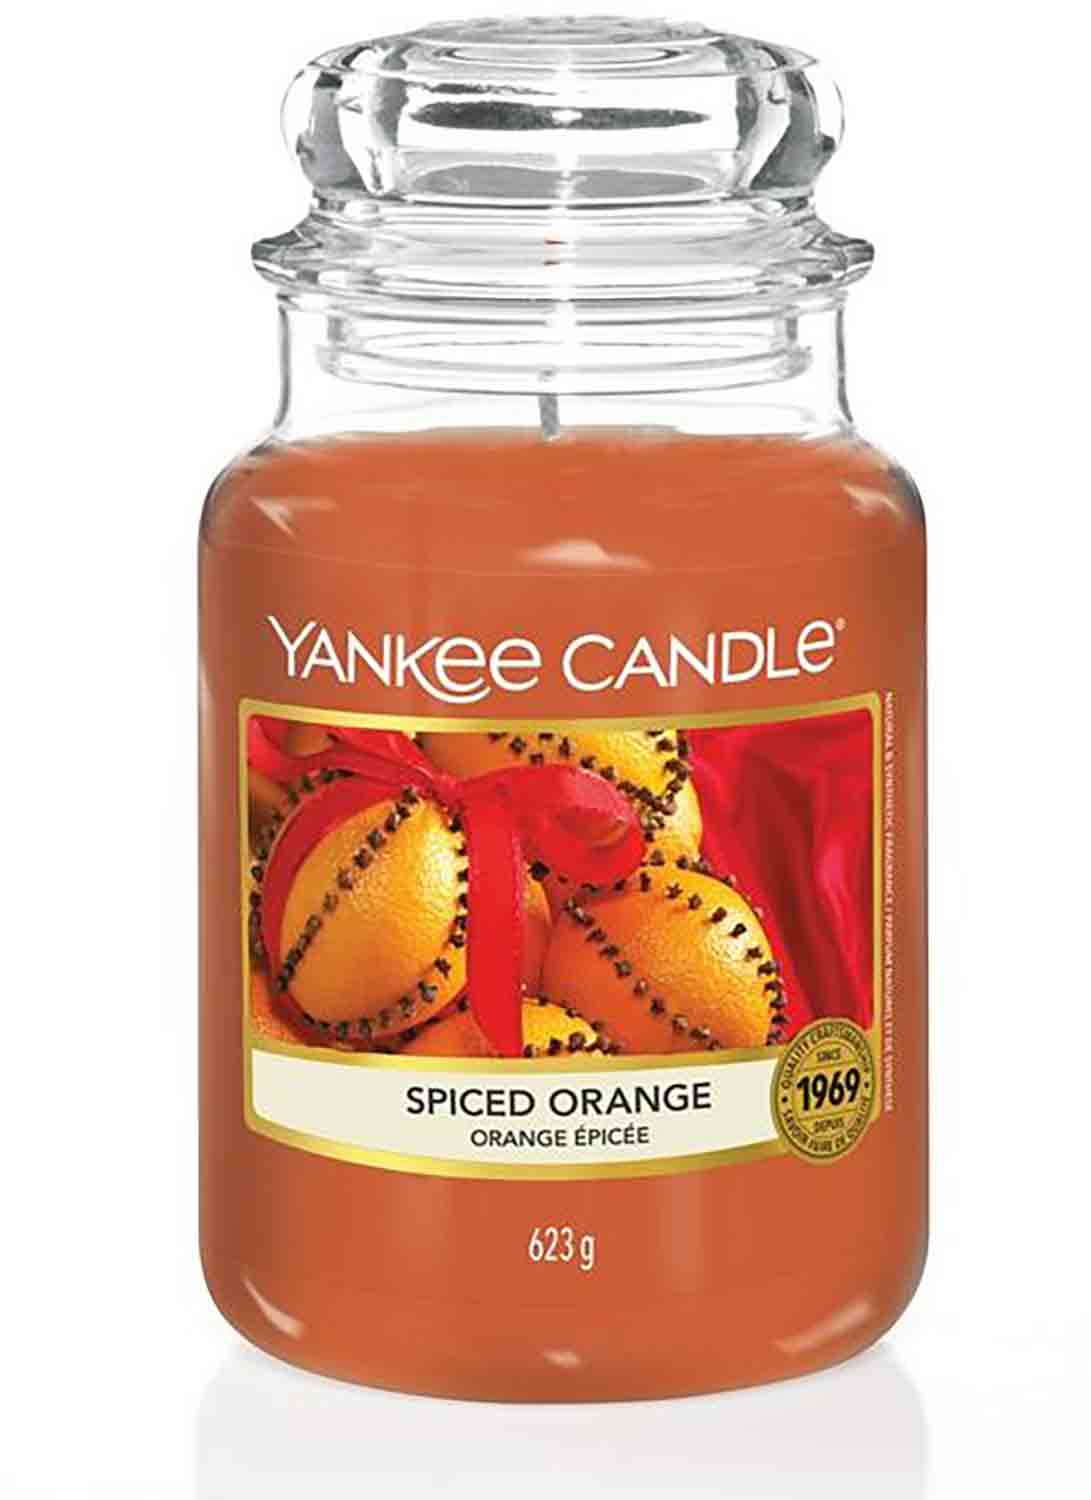 Yankee Candle Spiced Orange 623g Assorted